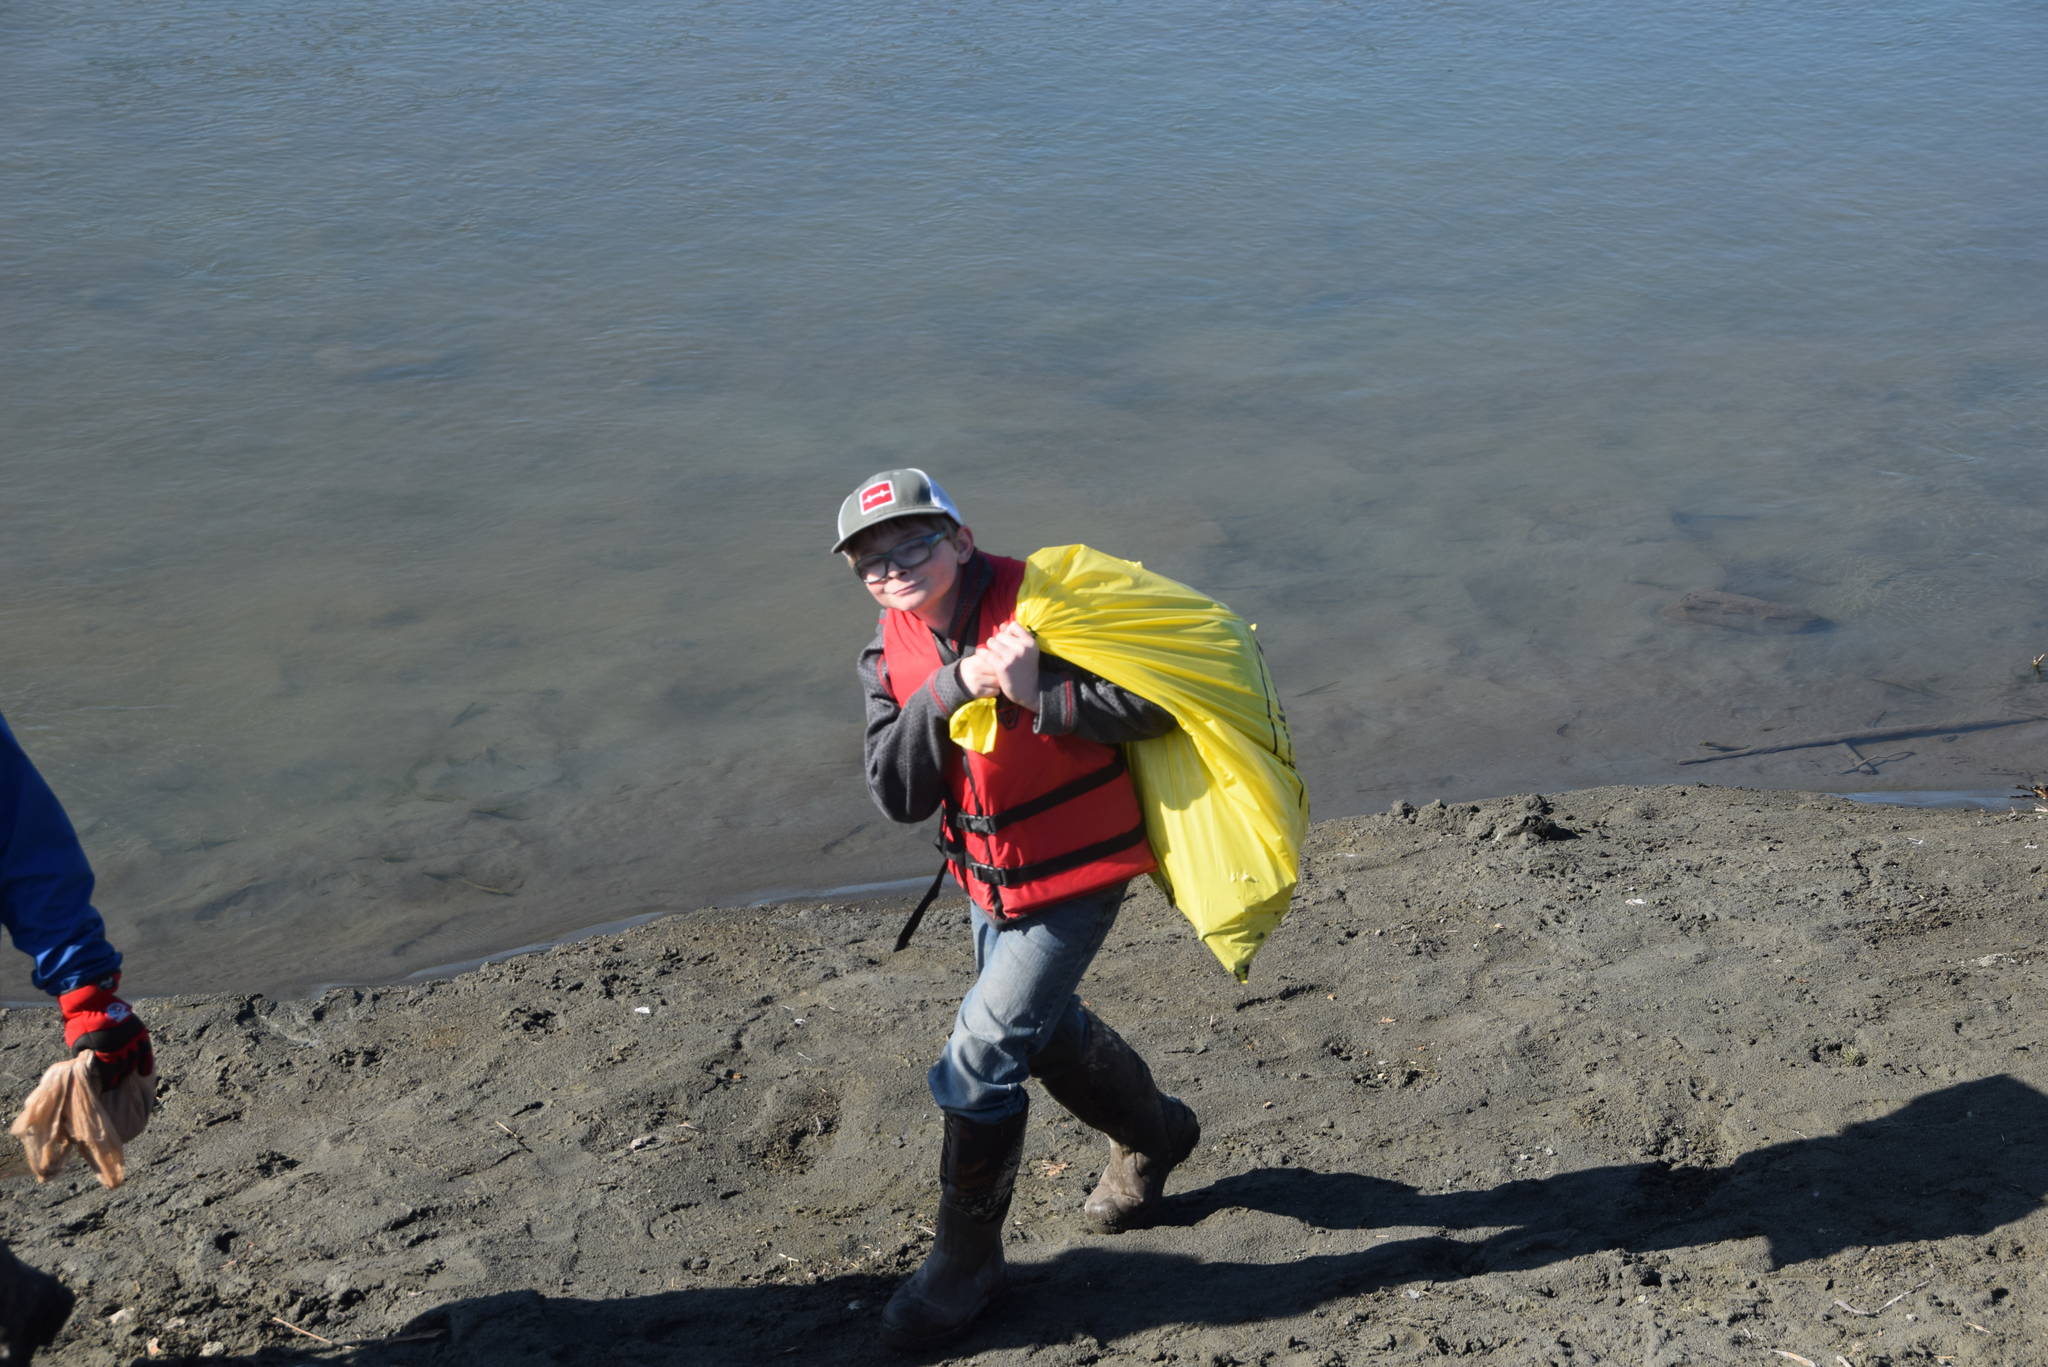 A student from Redoubt Elementary carries his haul back to the pile during the 6th Annual Kids Kenai River Spring Cleanup at Swiftwater Park in Soldotna, Alaska on May 3, 2019. (Photo by Brian Mazurek/Peninsula Clarion)